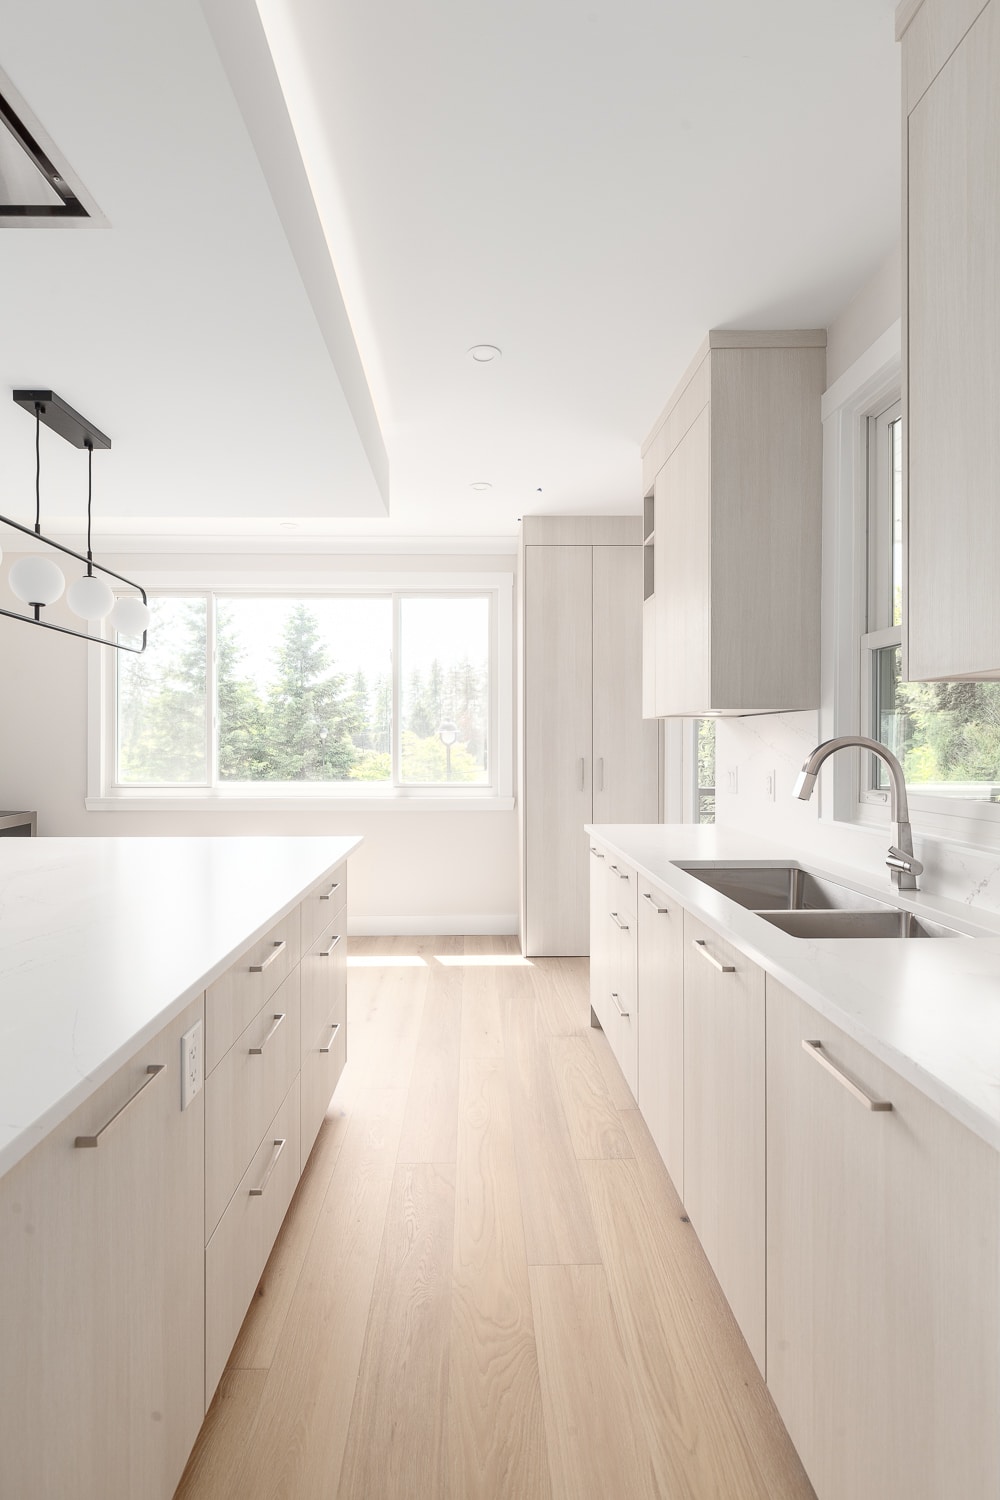 West Vancouver kitchen Remodeling done by Canadian Home Style